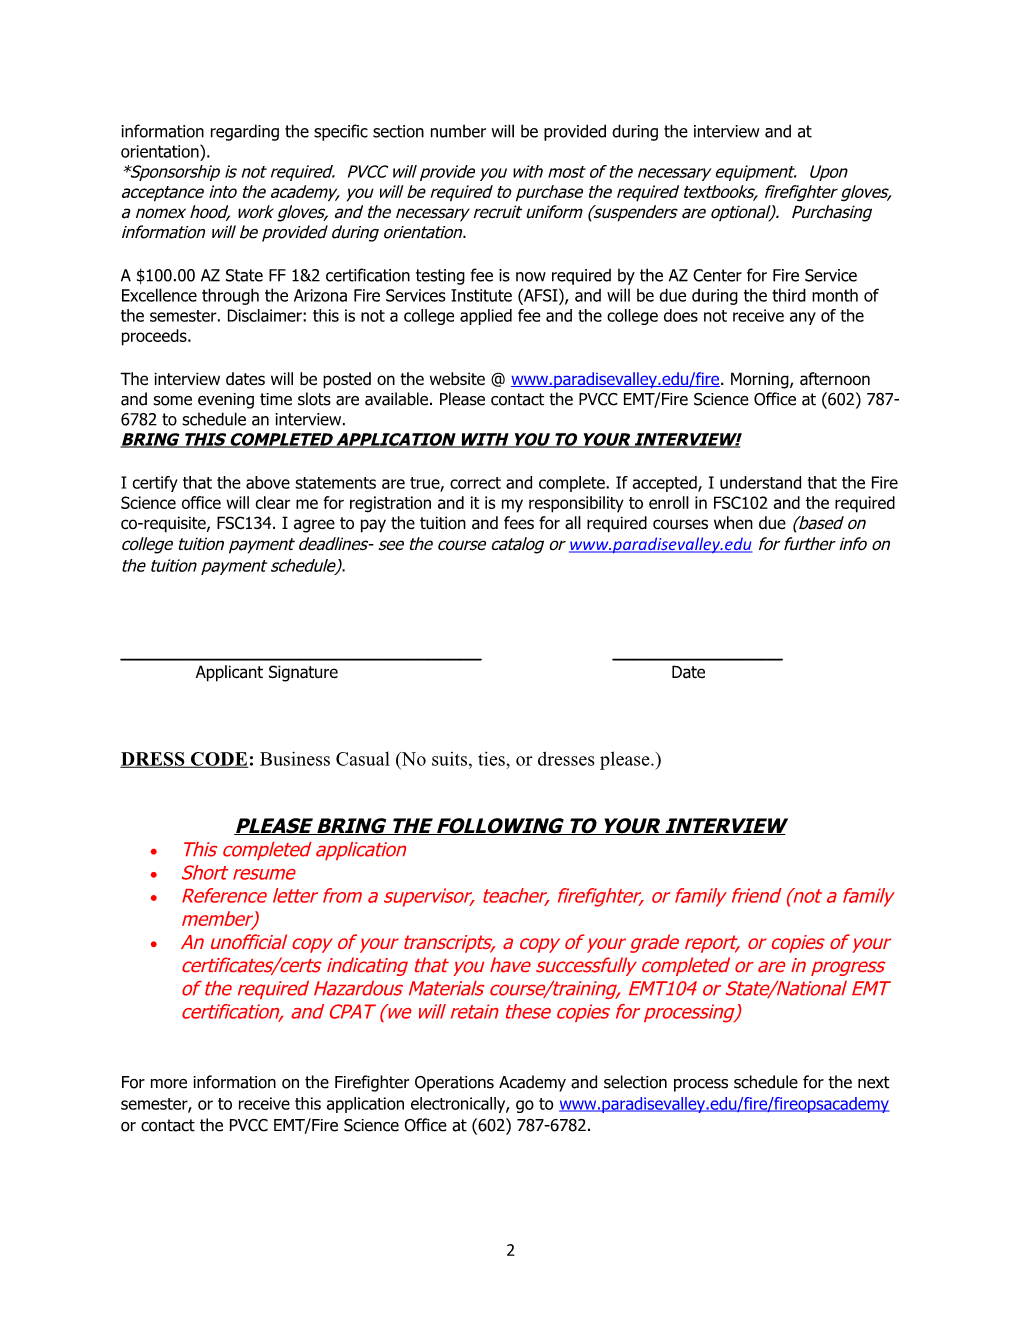 PVCC Firefighter Operations Academy Application (FSC102)